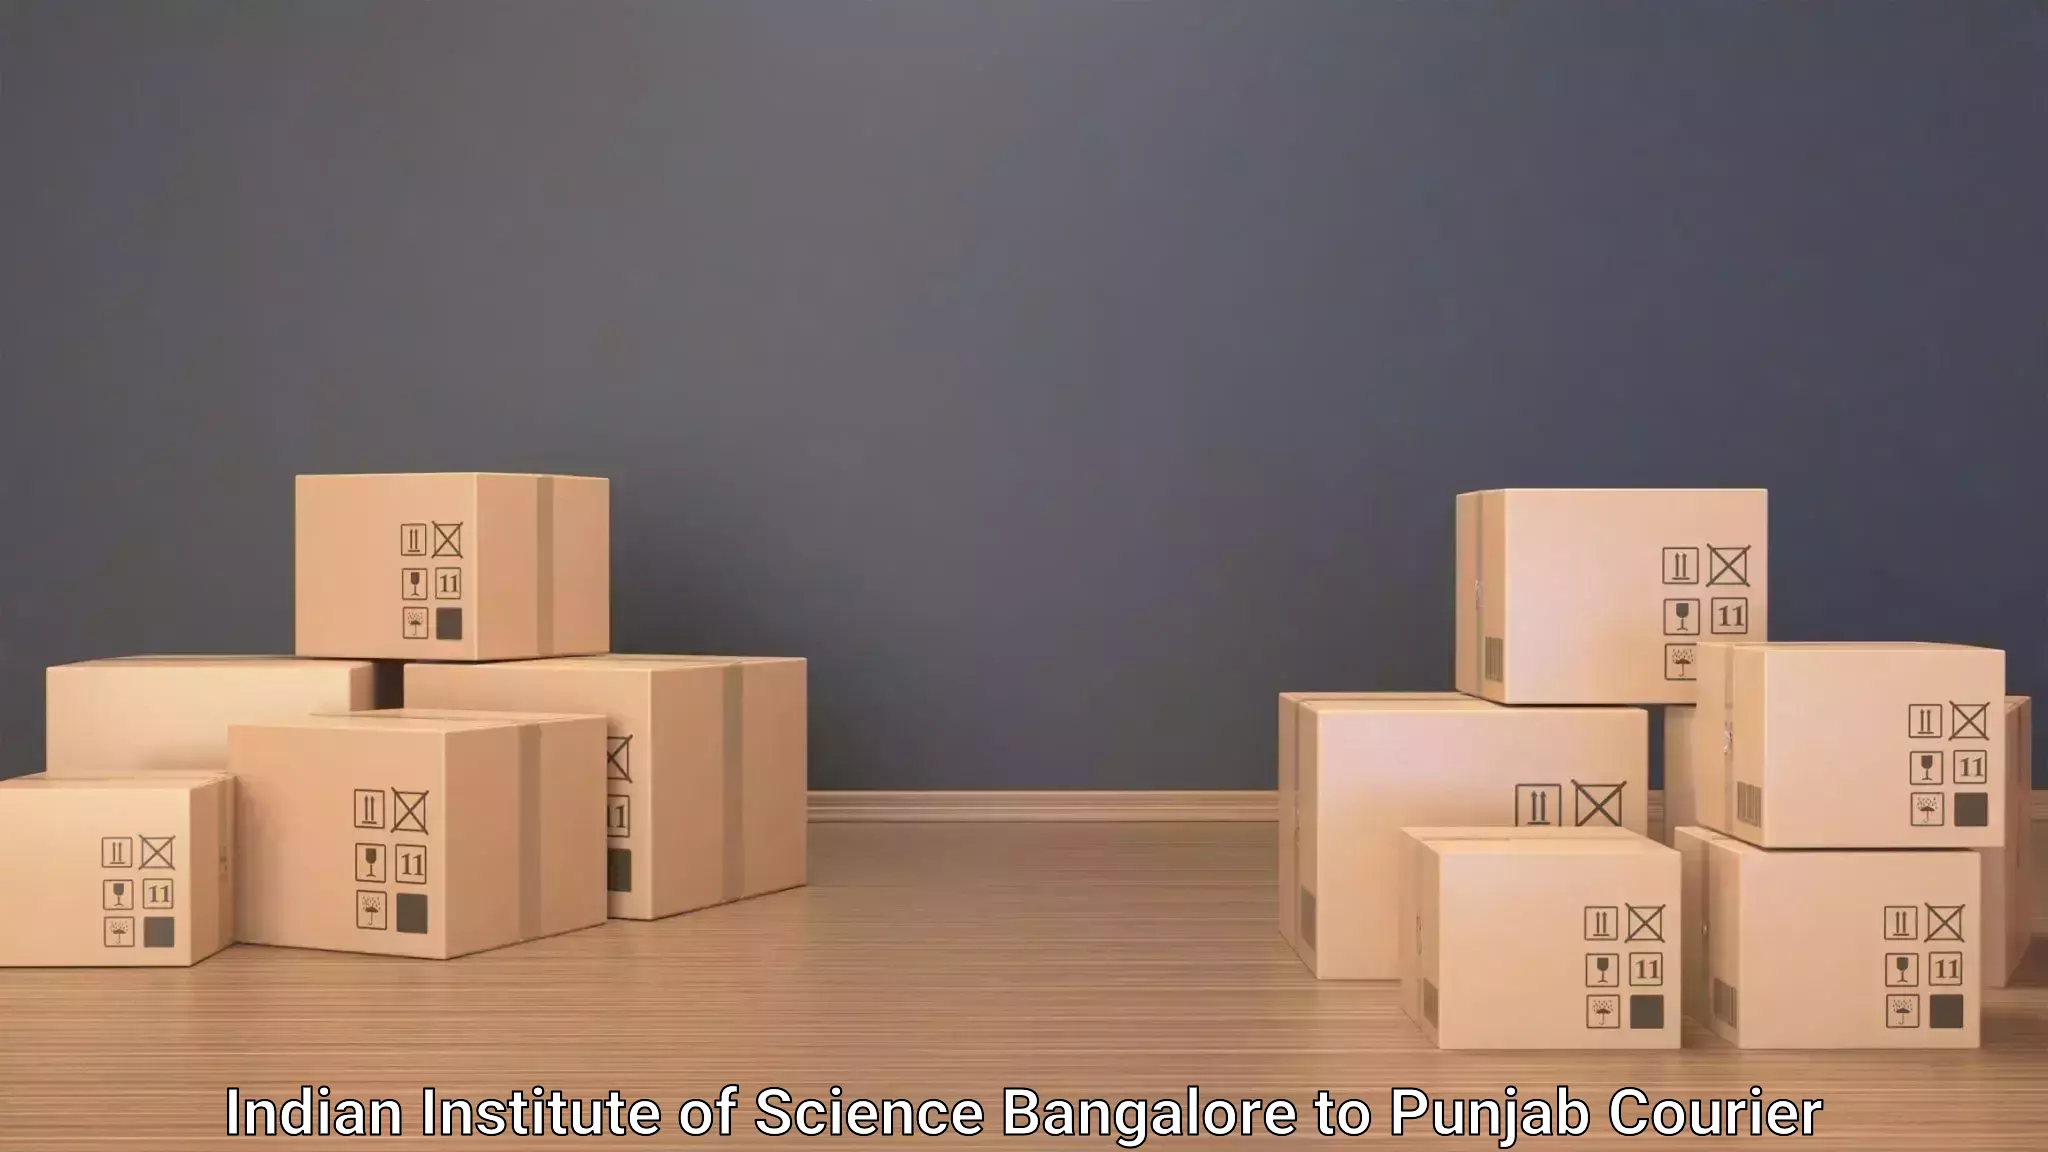 Baggage transport technology Indian Institute of Science Bangalore to Punjab